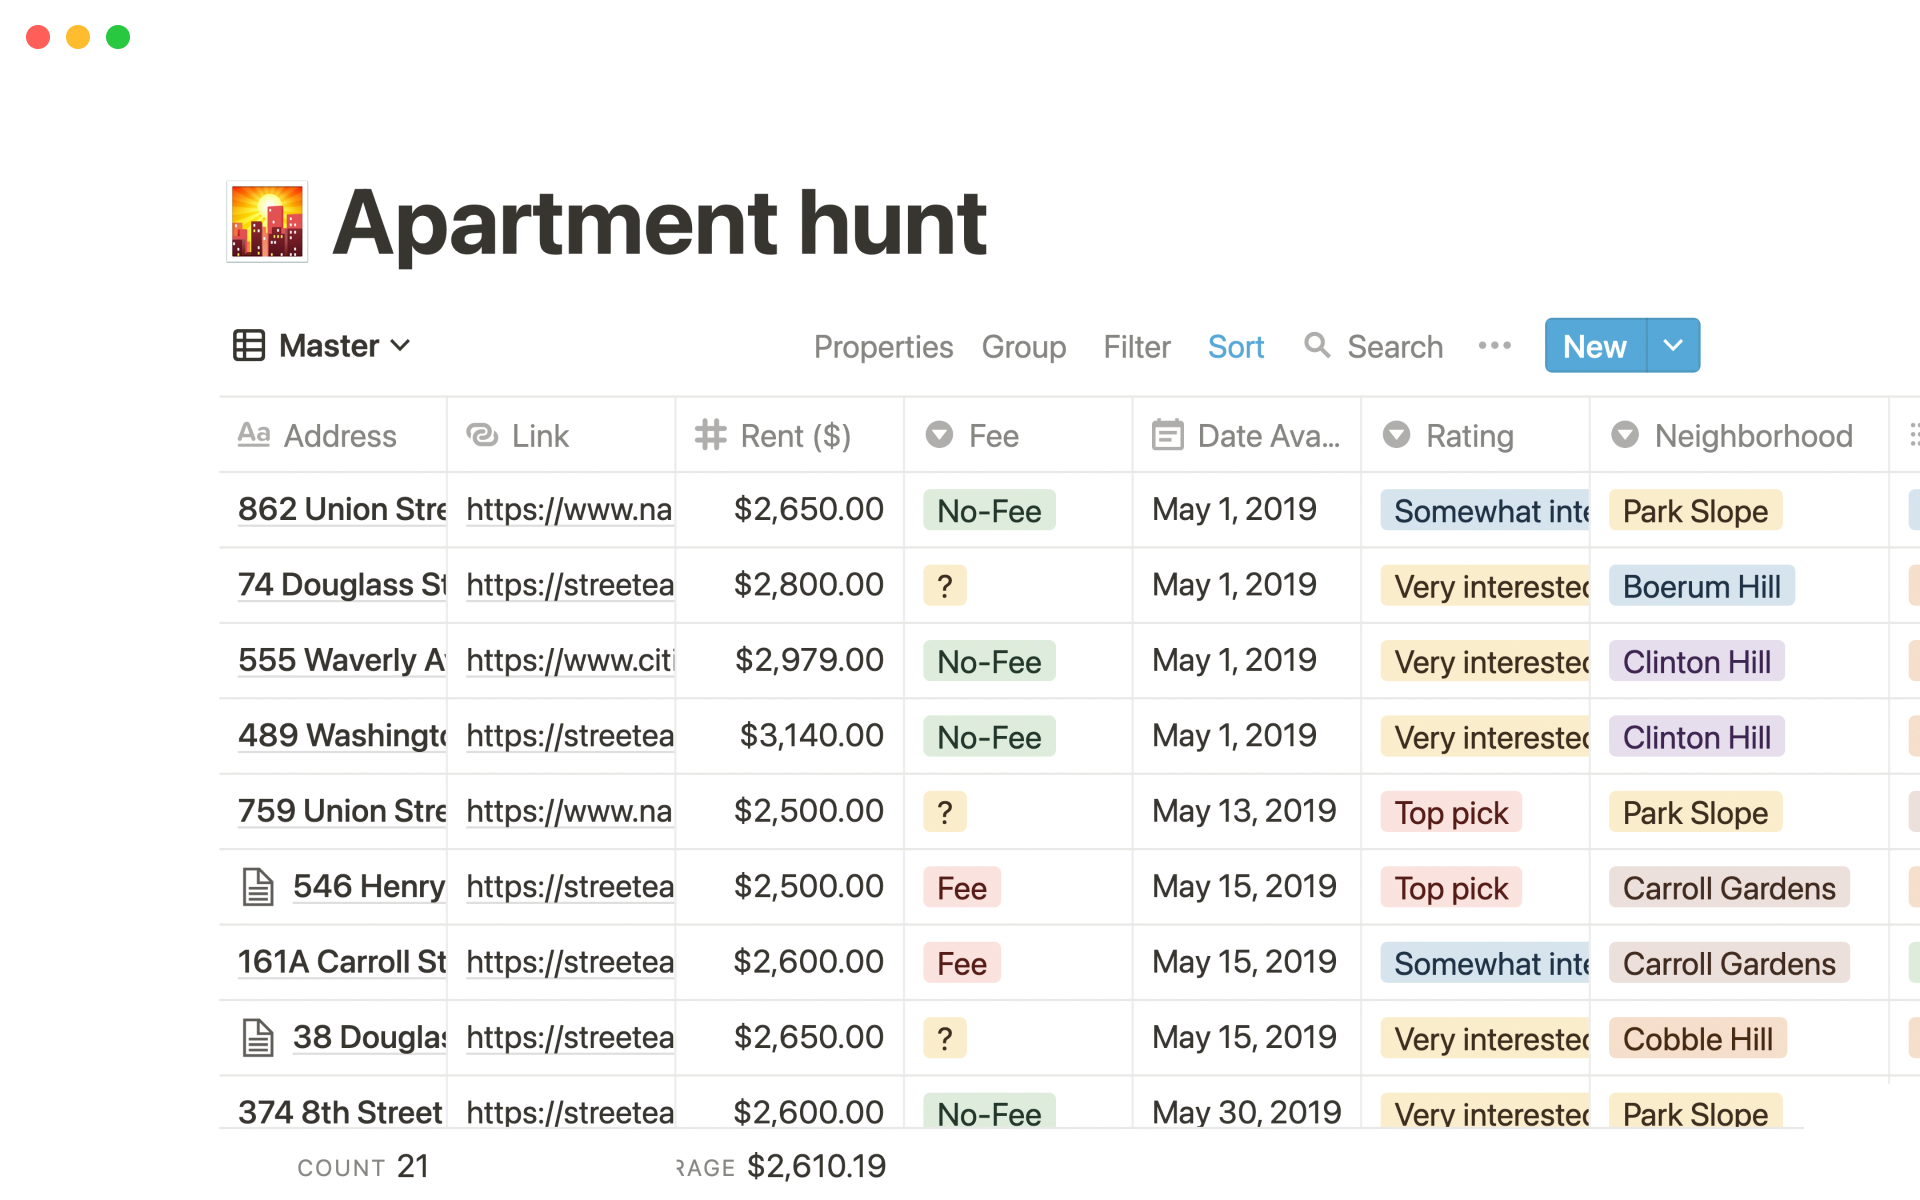 The desktop image for the Apartment hunt template